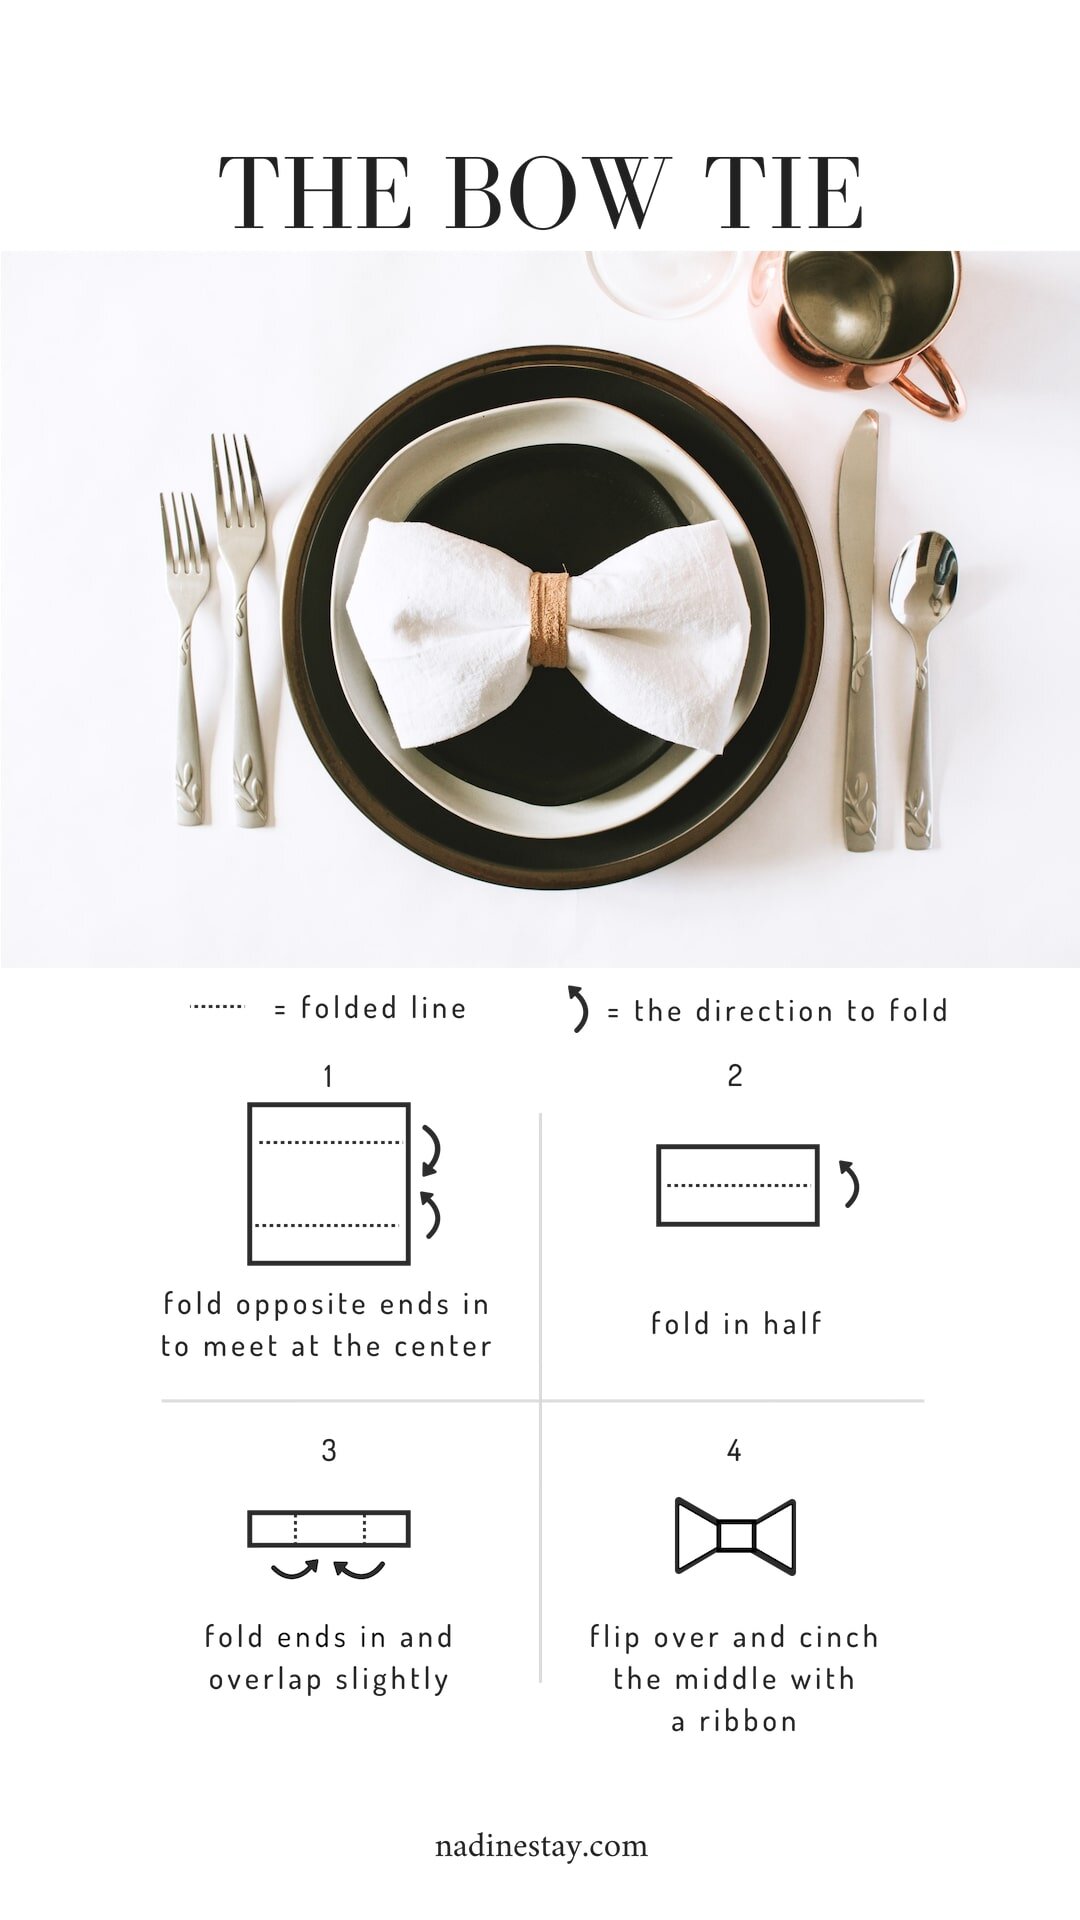 5 easy ways to fold a cloth napkin - place setting inspiration for weddings, birthdays, holidays, and events. Tablescape and table setting inspiration - The bow tie